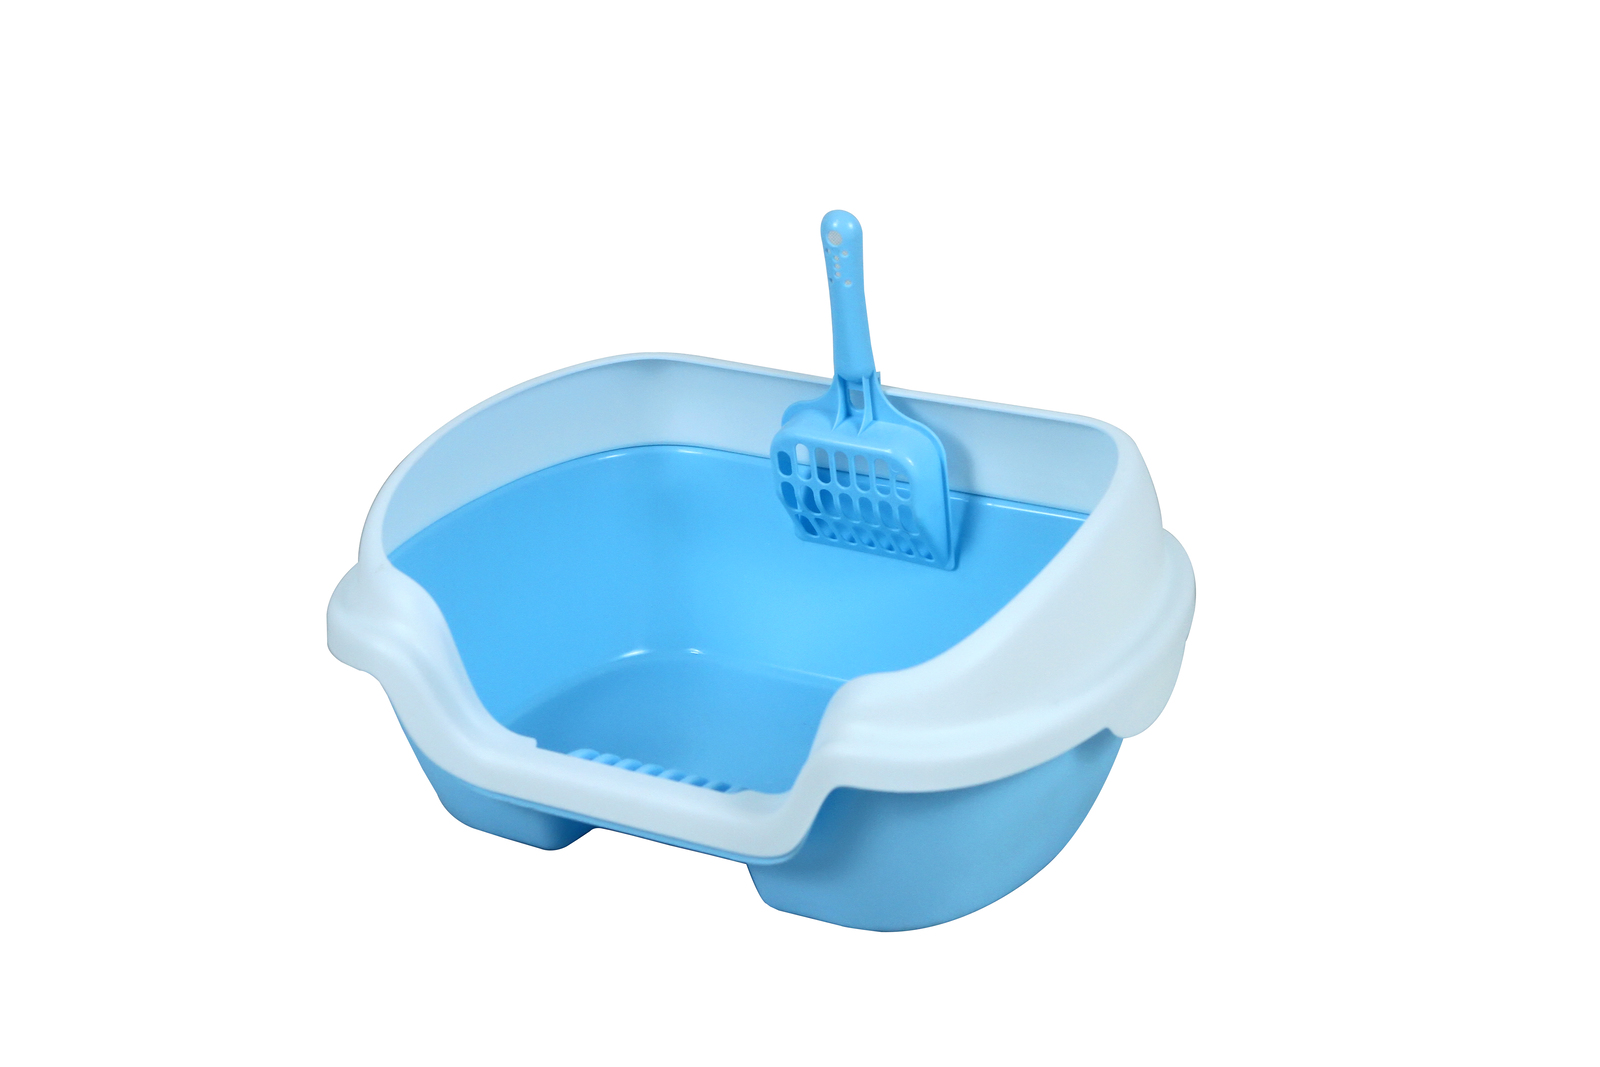 CatLover  ห้องน้ำแมว กระบะทรายแมว ถาดทรายแมว / Small Portable Cat Toilet Litter Box Tray with Scoop Overall size : about 40 cm (L) x 30 cm (W) x 12 cm (H)